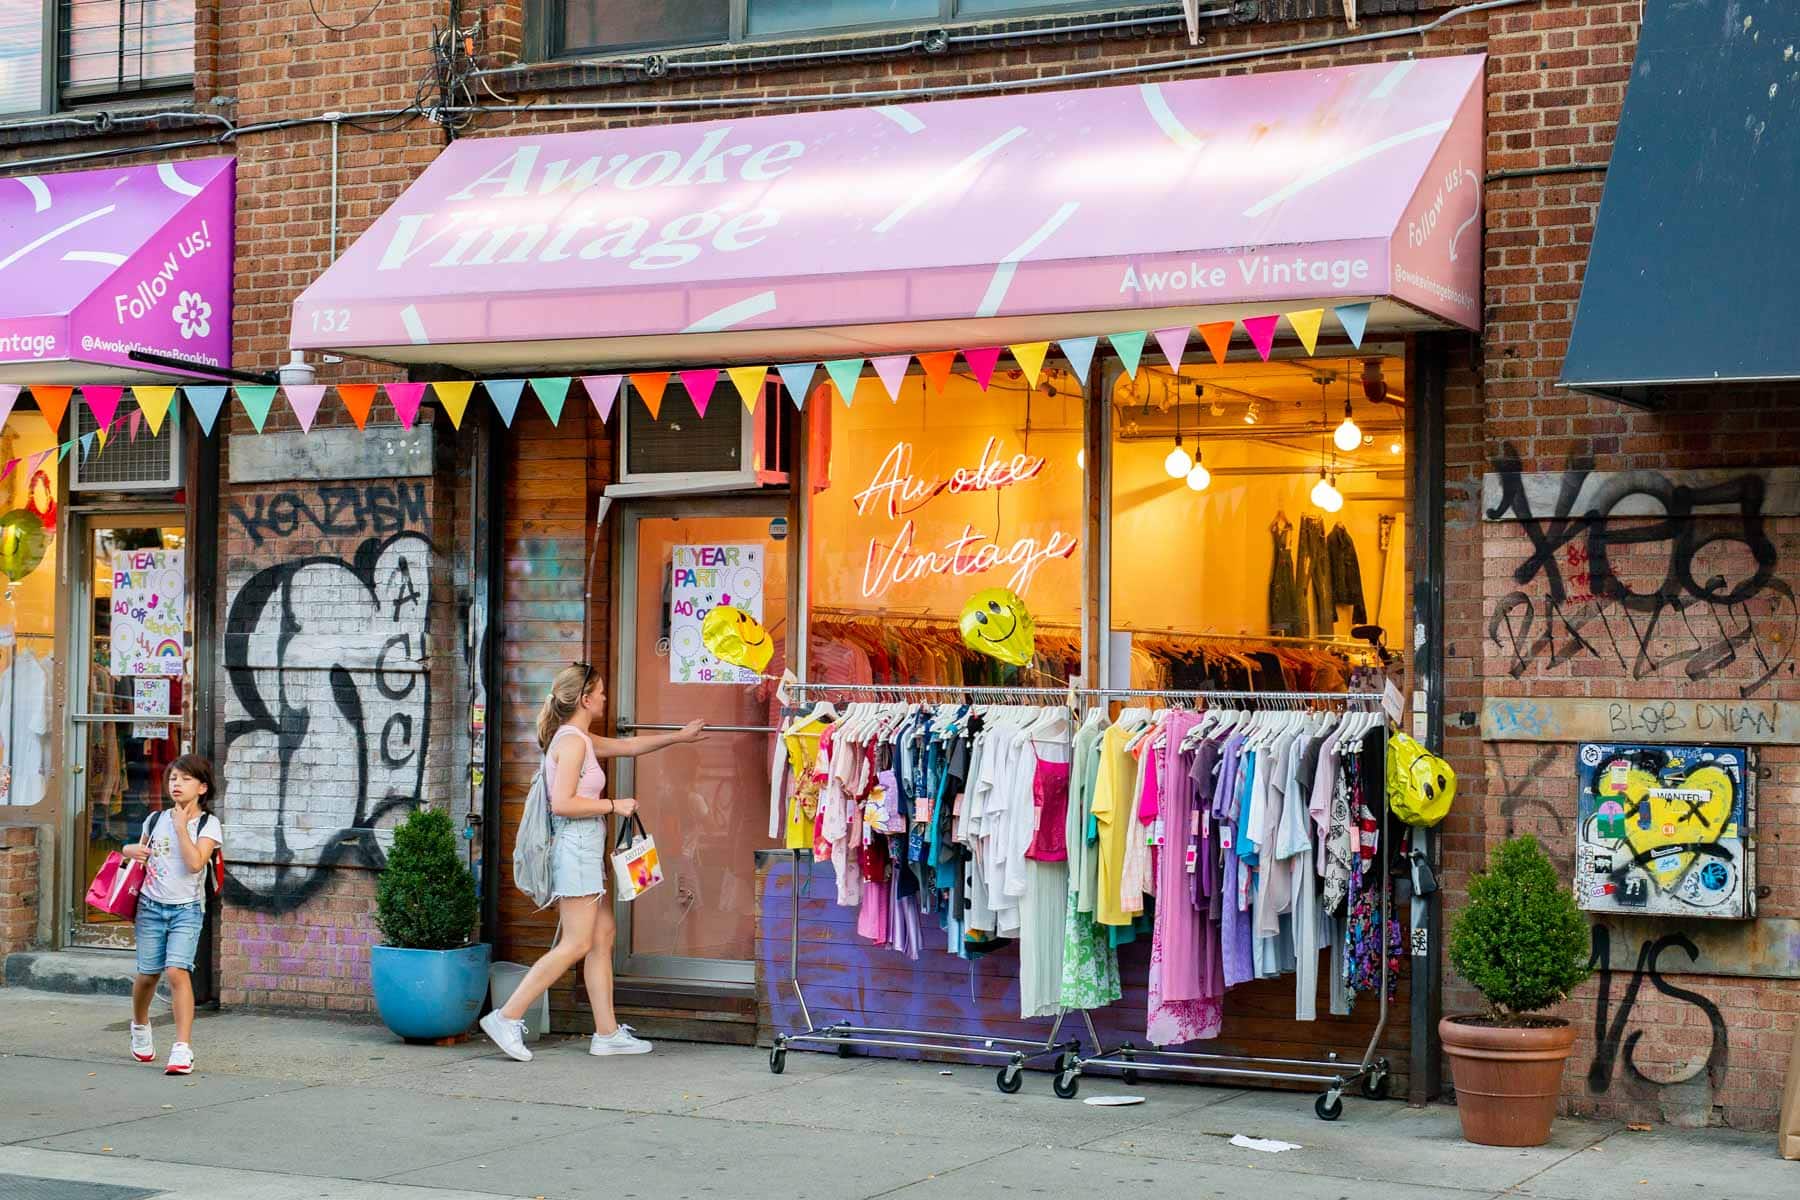 Best Vintage Stores Awoke Vintage, things to do in New York City with teens